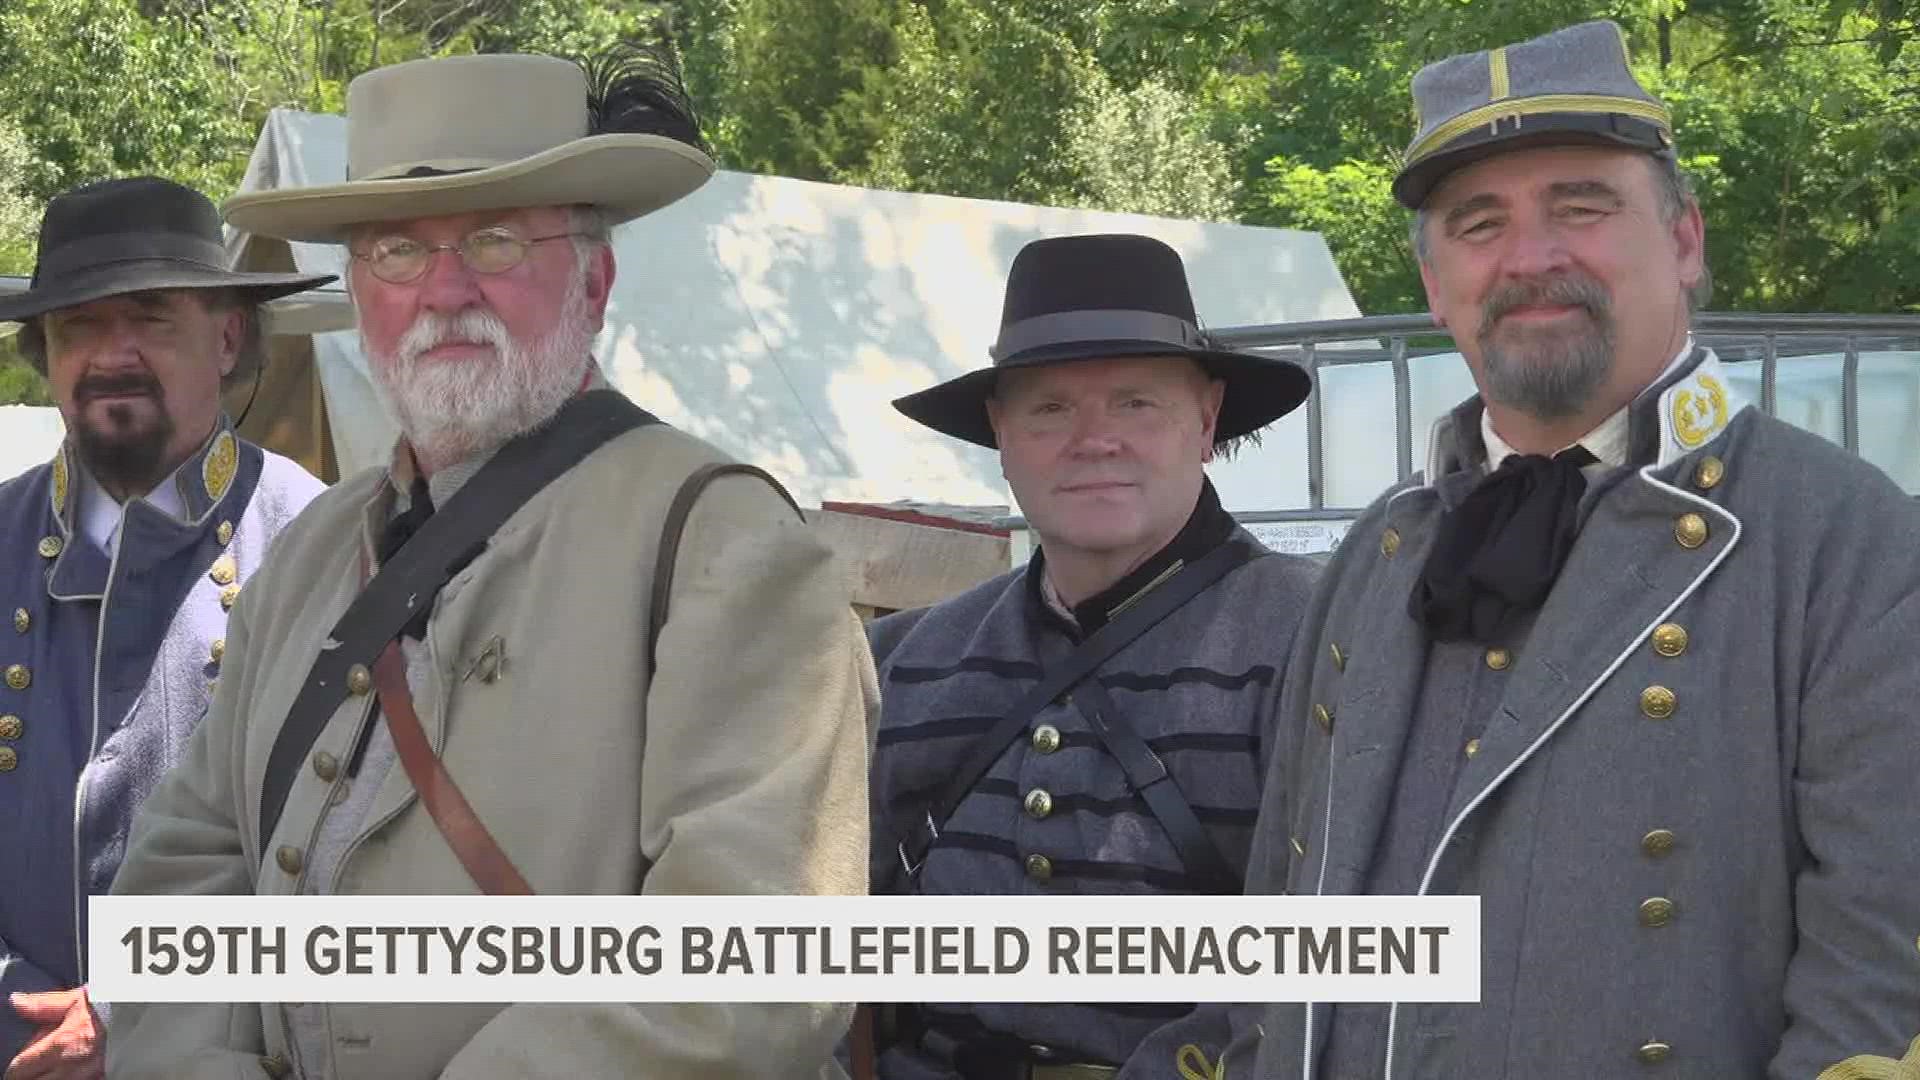 The Gettysburg Battlefield Preservation Association held its annual reenactment July 1 to 3 honoring the 159th anniversary of the Civil War’s Battle of Gettysburg.